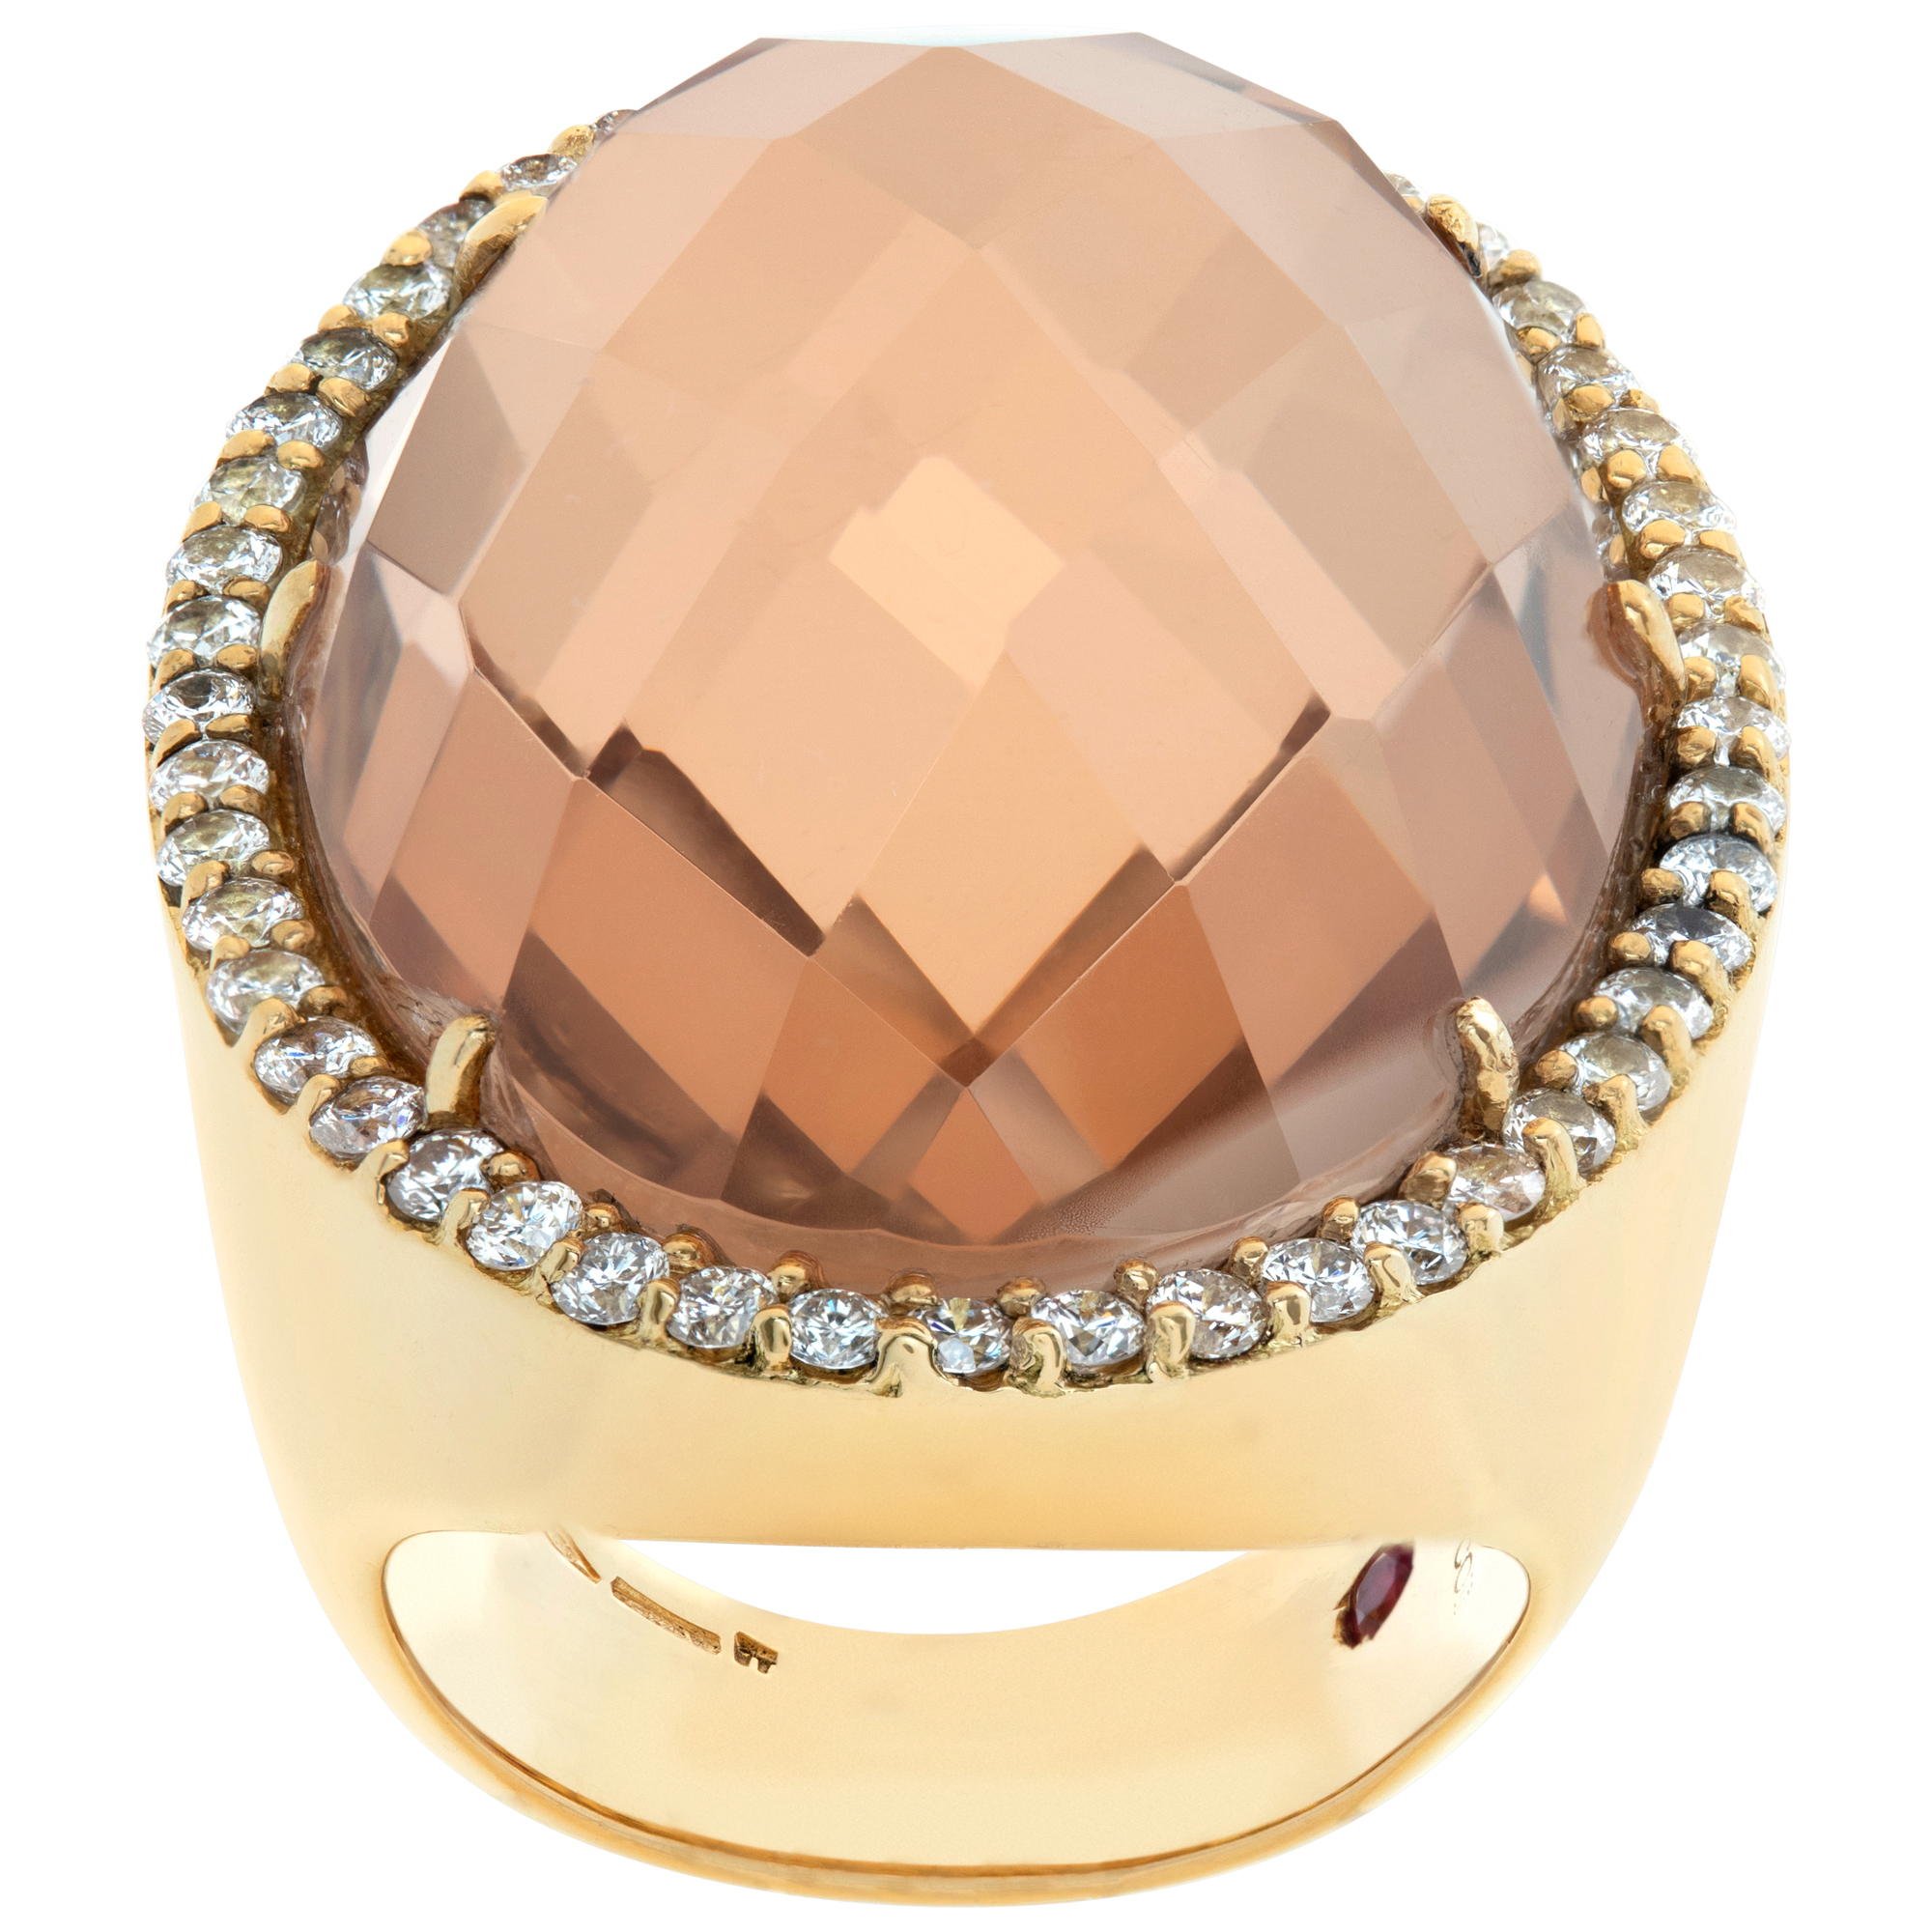 Roberto Coin "Cocktail Collection" Rock Crystal & diamond ring in 18k